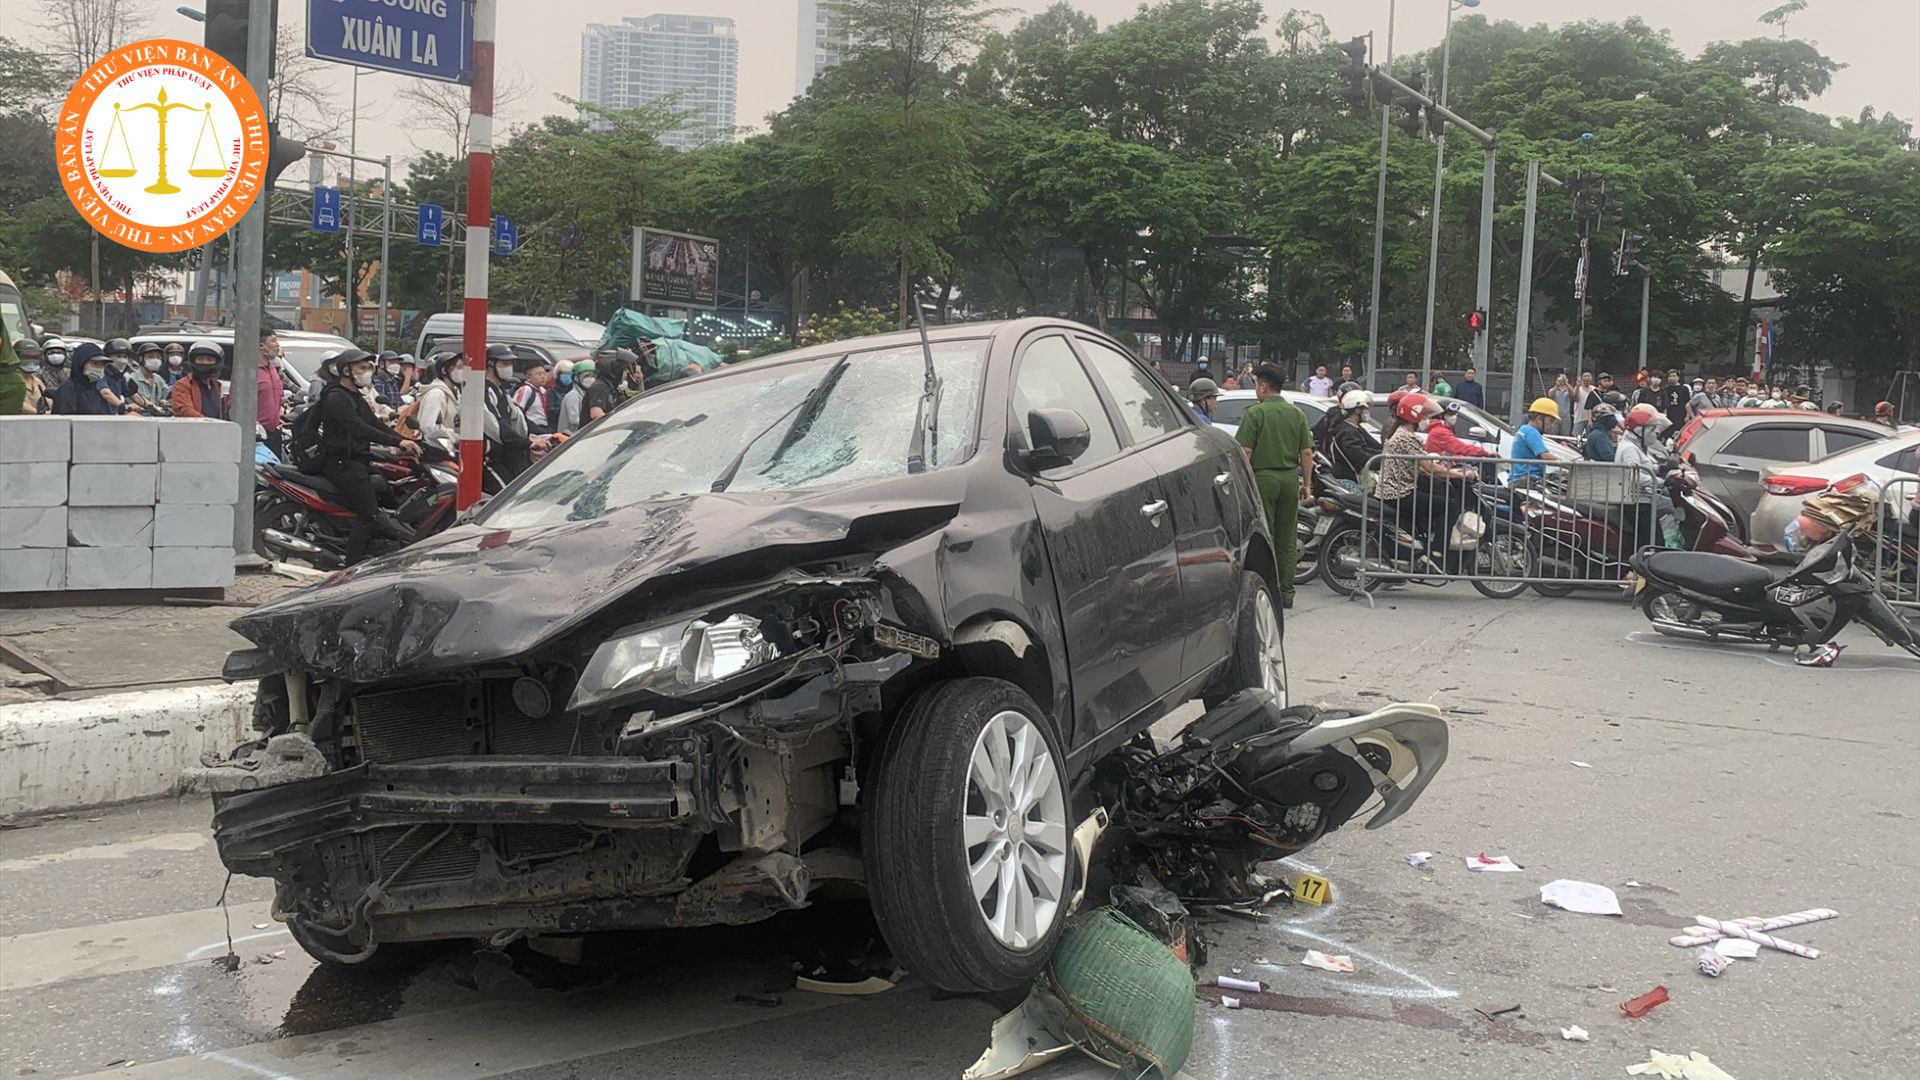 What are the regulations on liability to compensate for damage caused by traffic accidents in Vietnam?